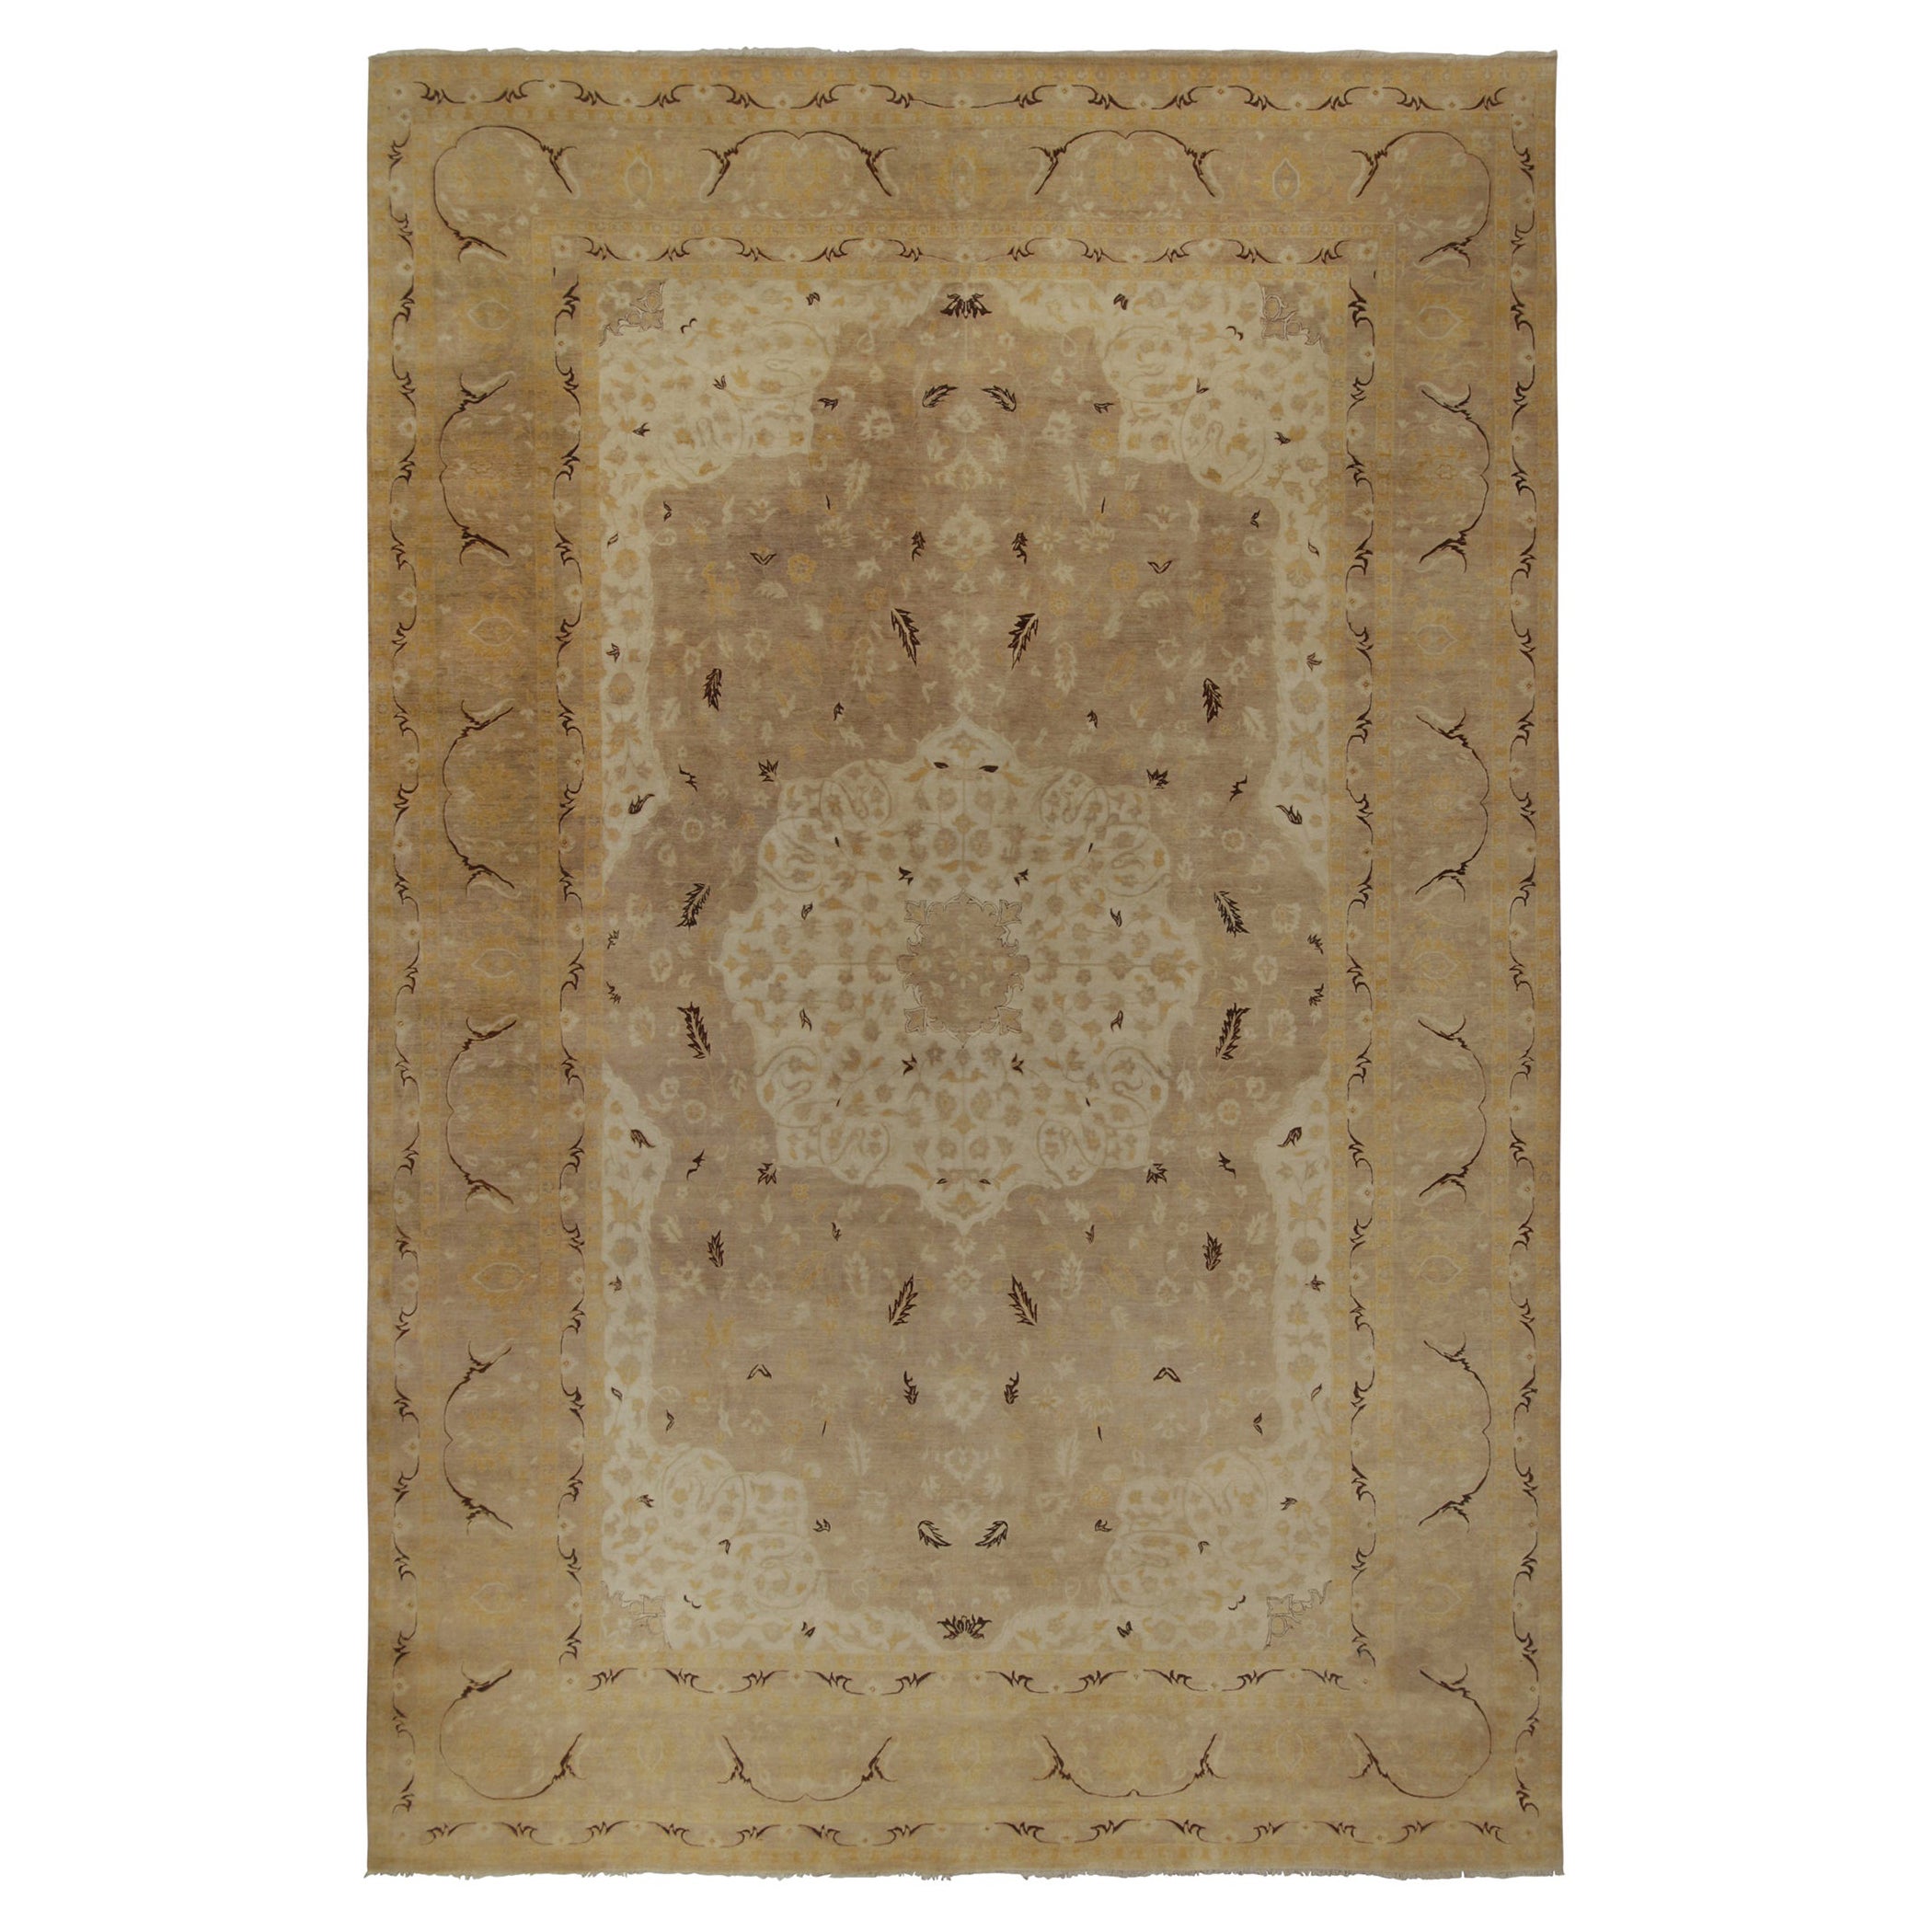 Rug & Kilim’s Classic Tabriz style rug in Beige-Brown and Gold Floral Patterns  For Sale